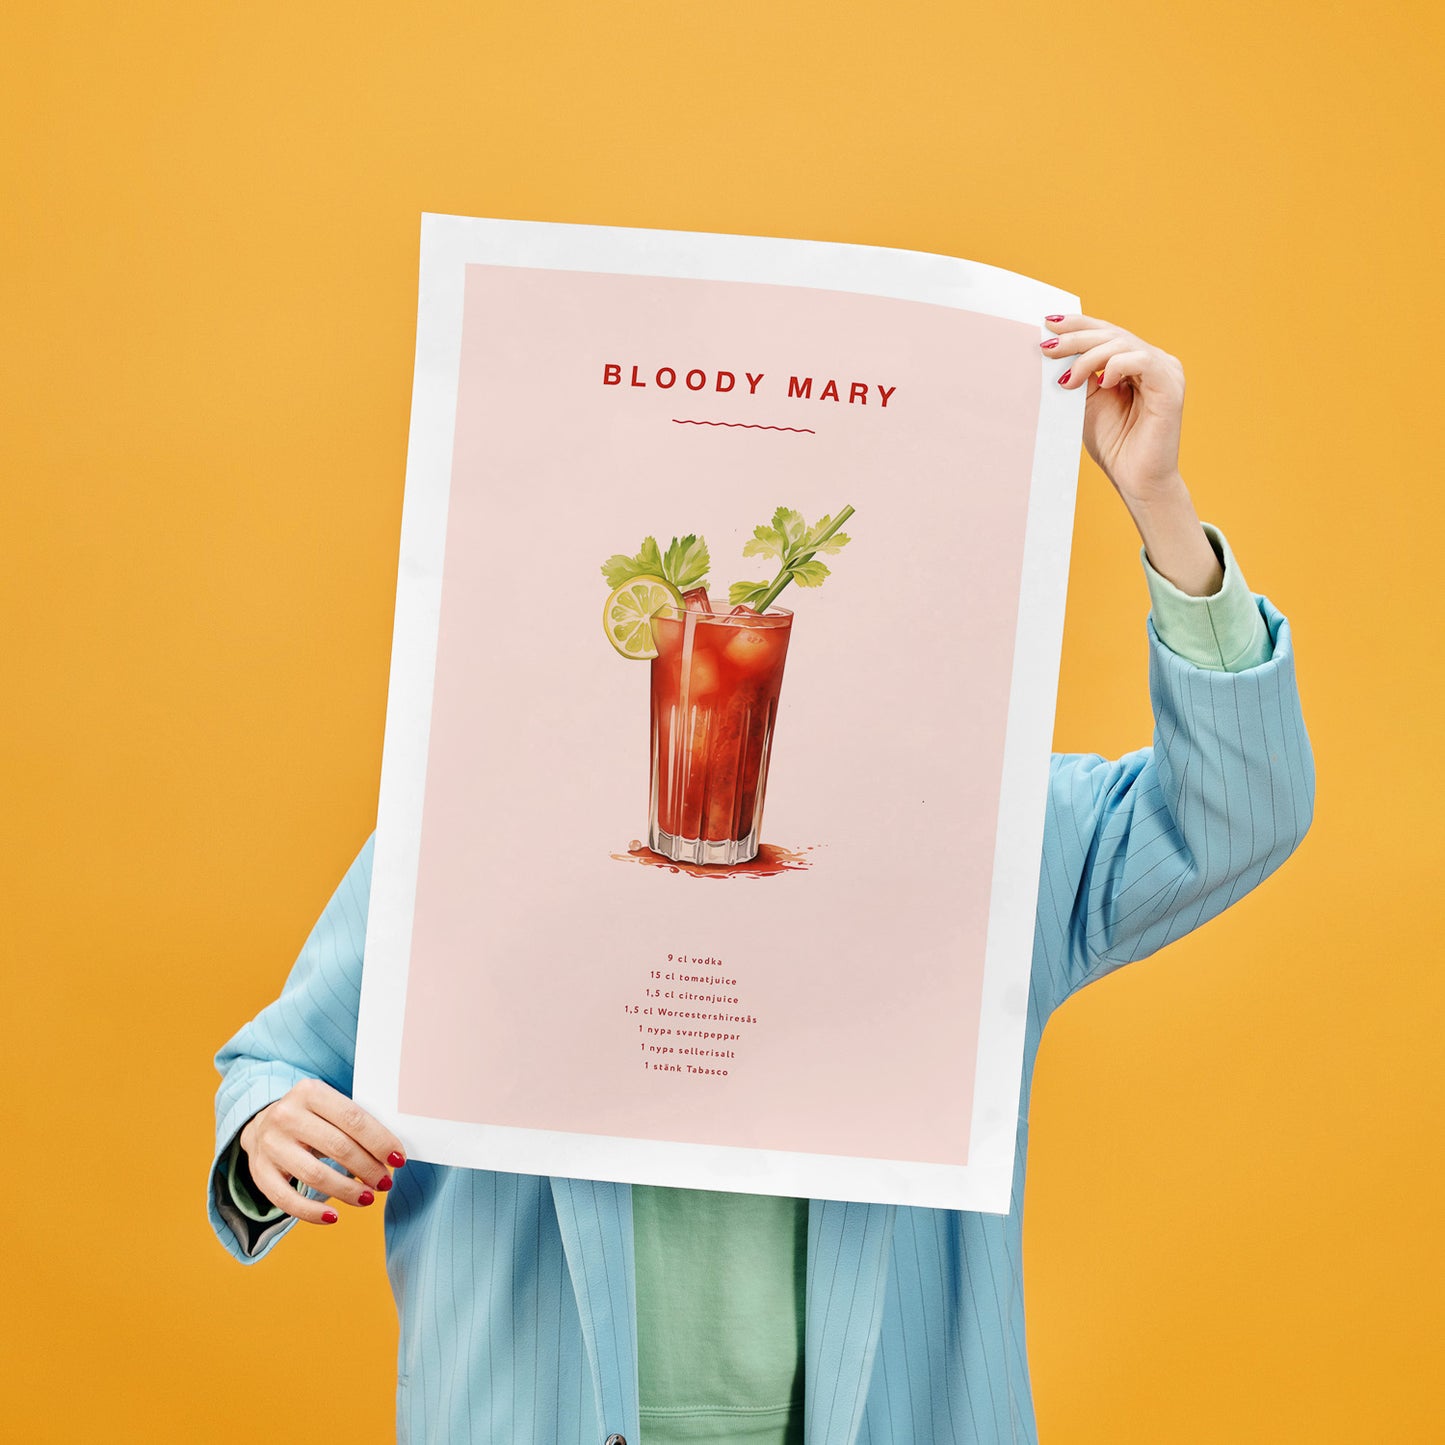 Bloody Mary Poster – Affisch med drink, drinkposter med cocktail, Bloody Mary recept poster